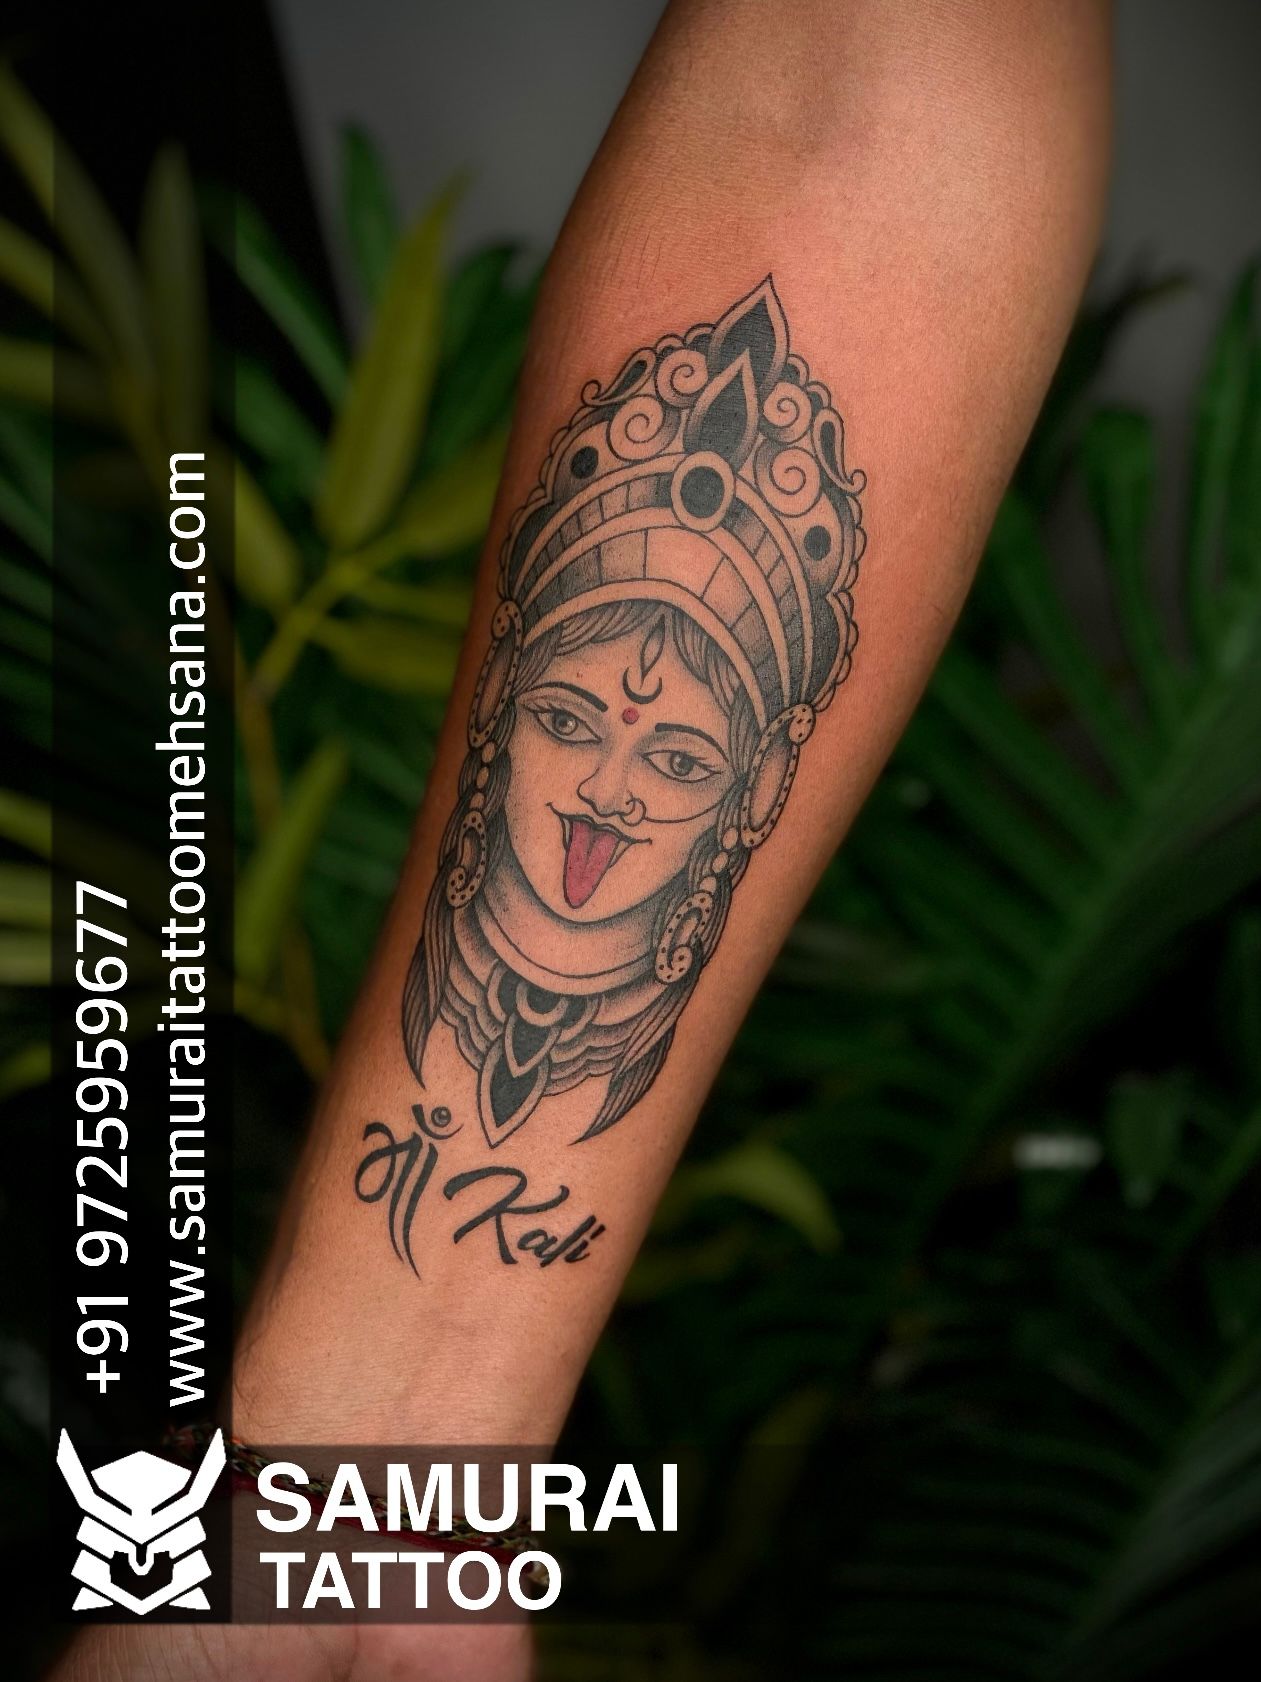 Create an indian inspired tattoo design by Hilbeart | Fiverr